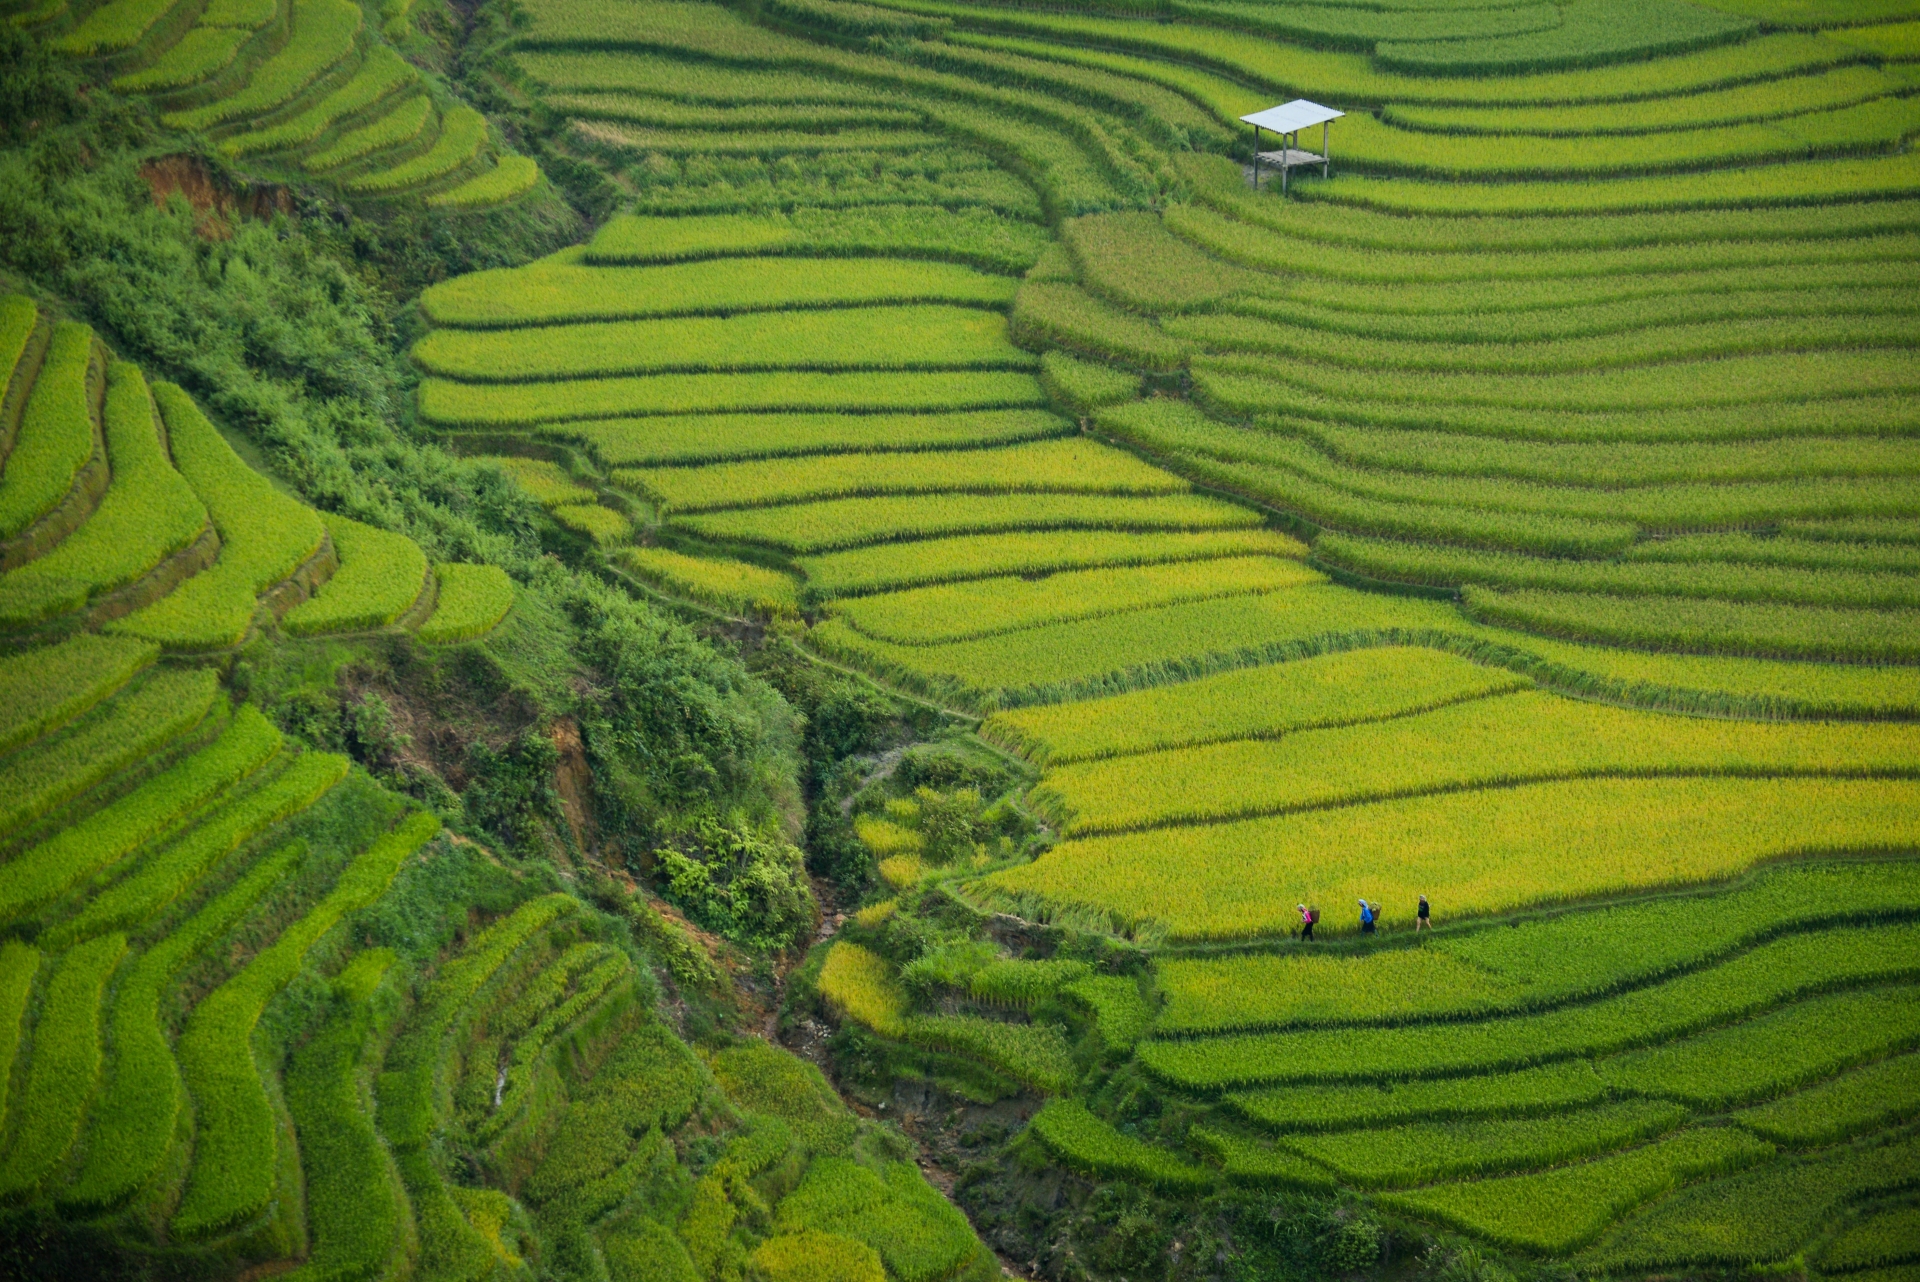 Developing a green bond market is crucial to Vietnam's sustainable development efforts